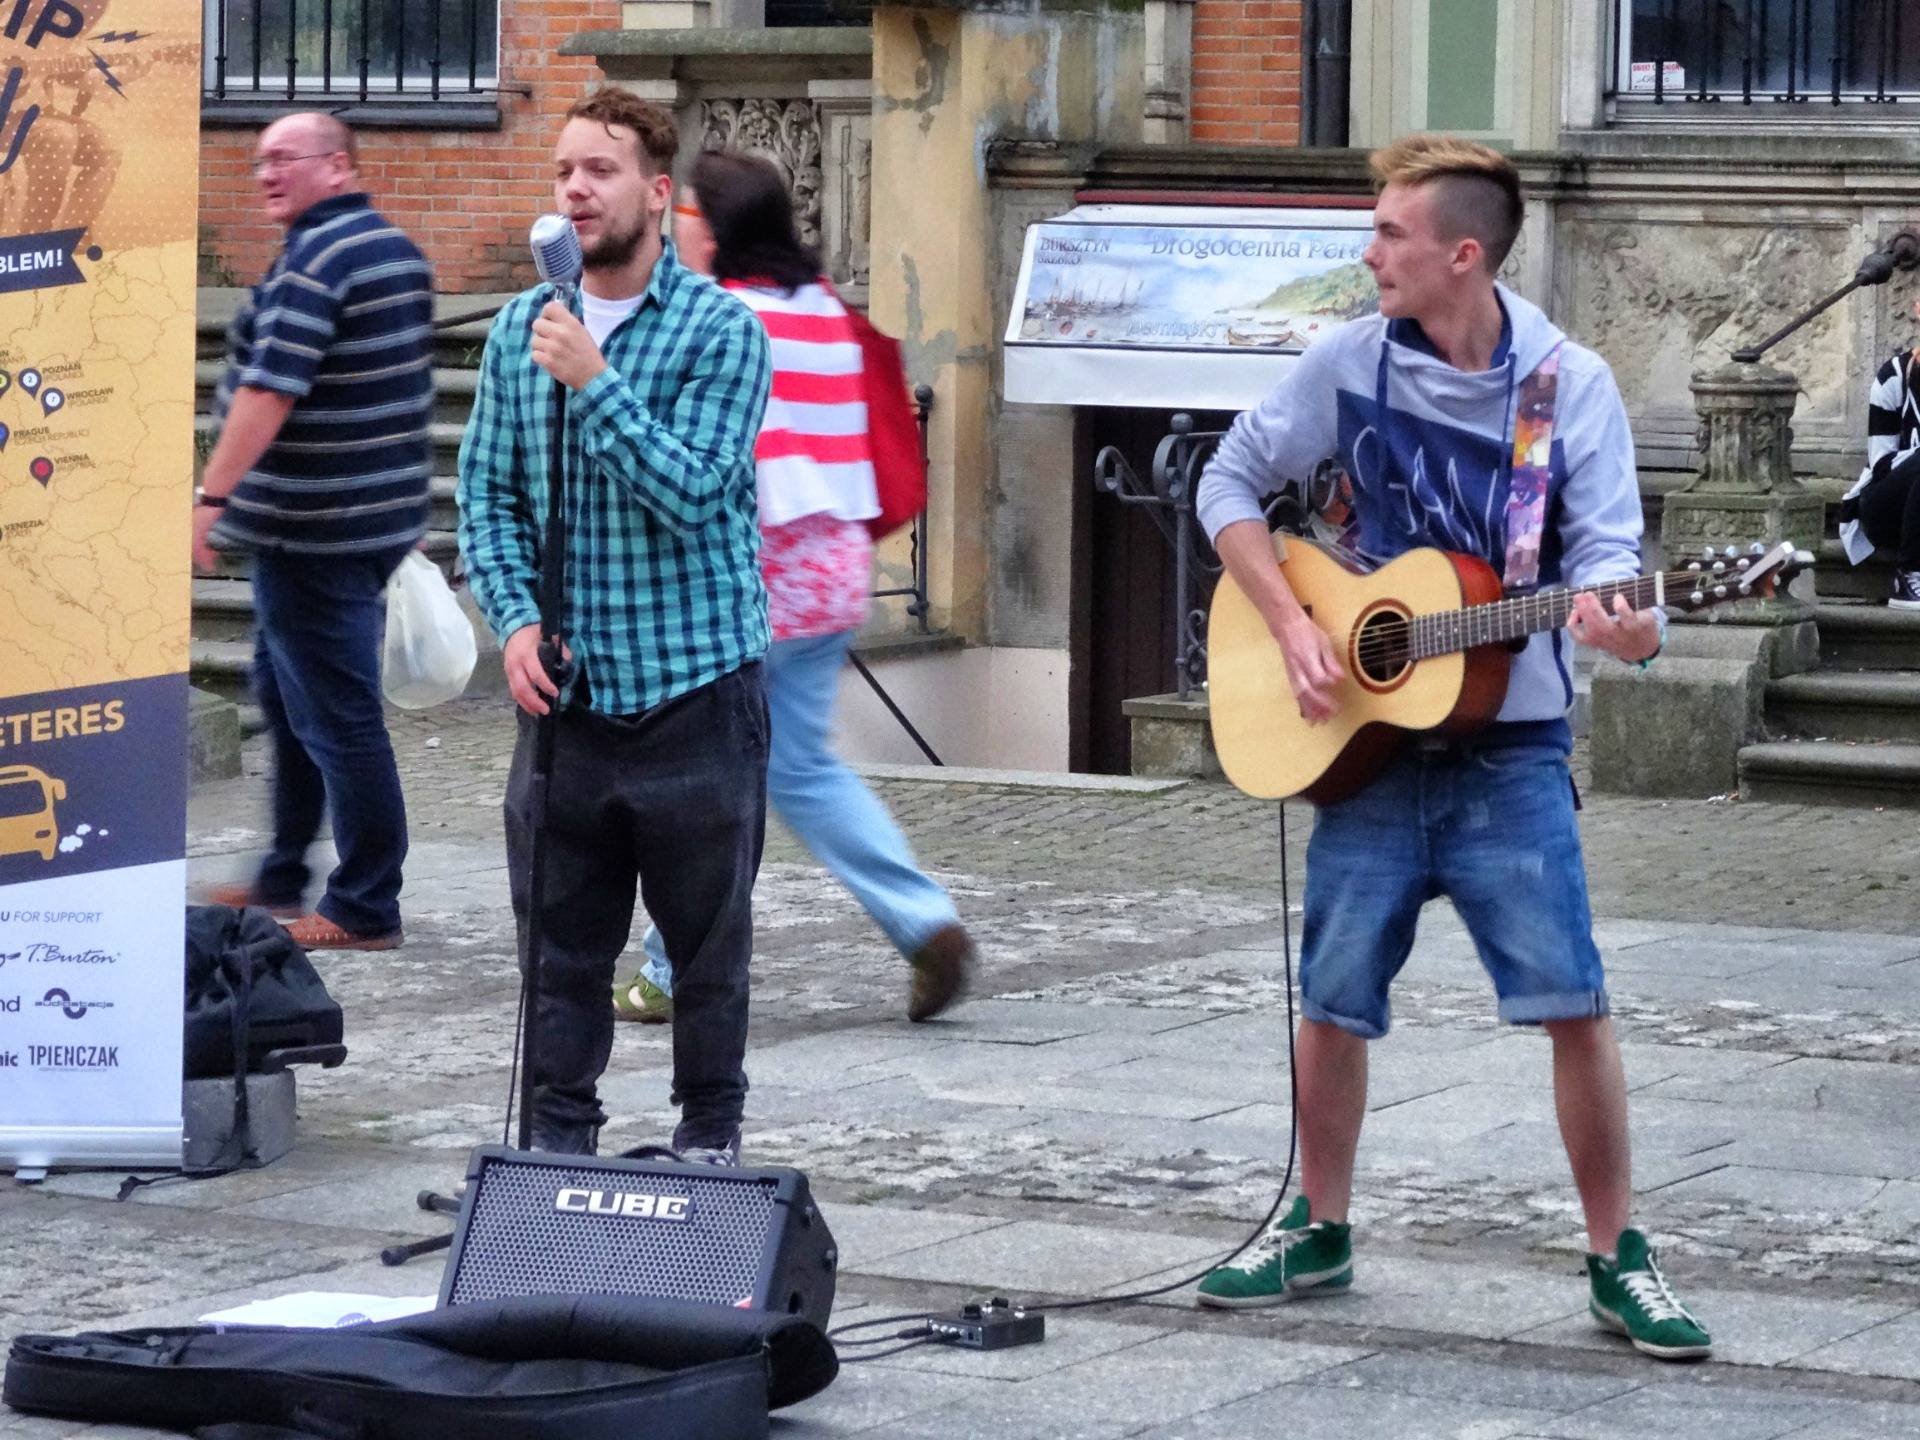 More buskers, on every, every corner